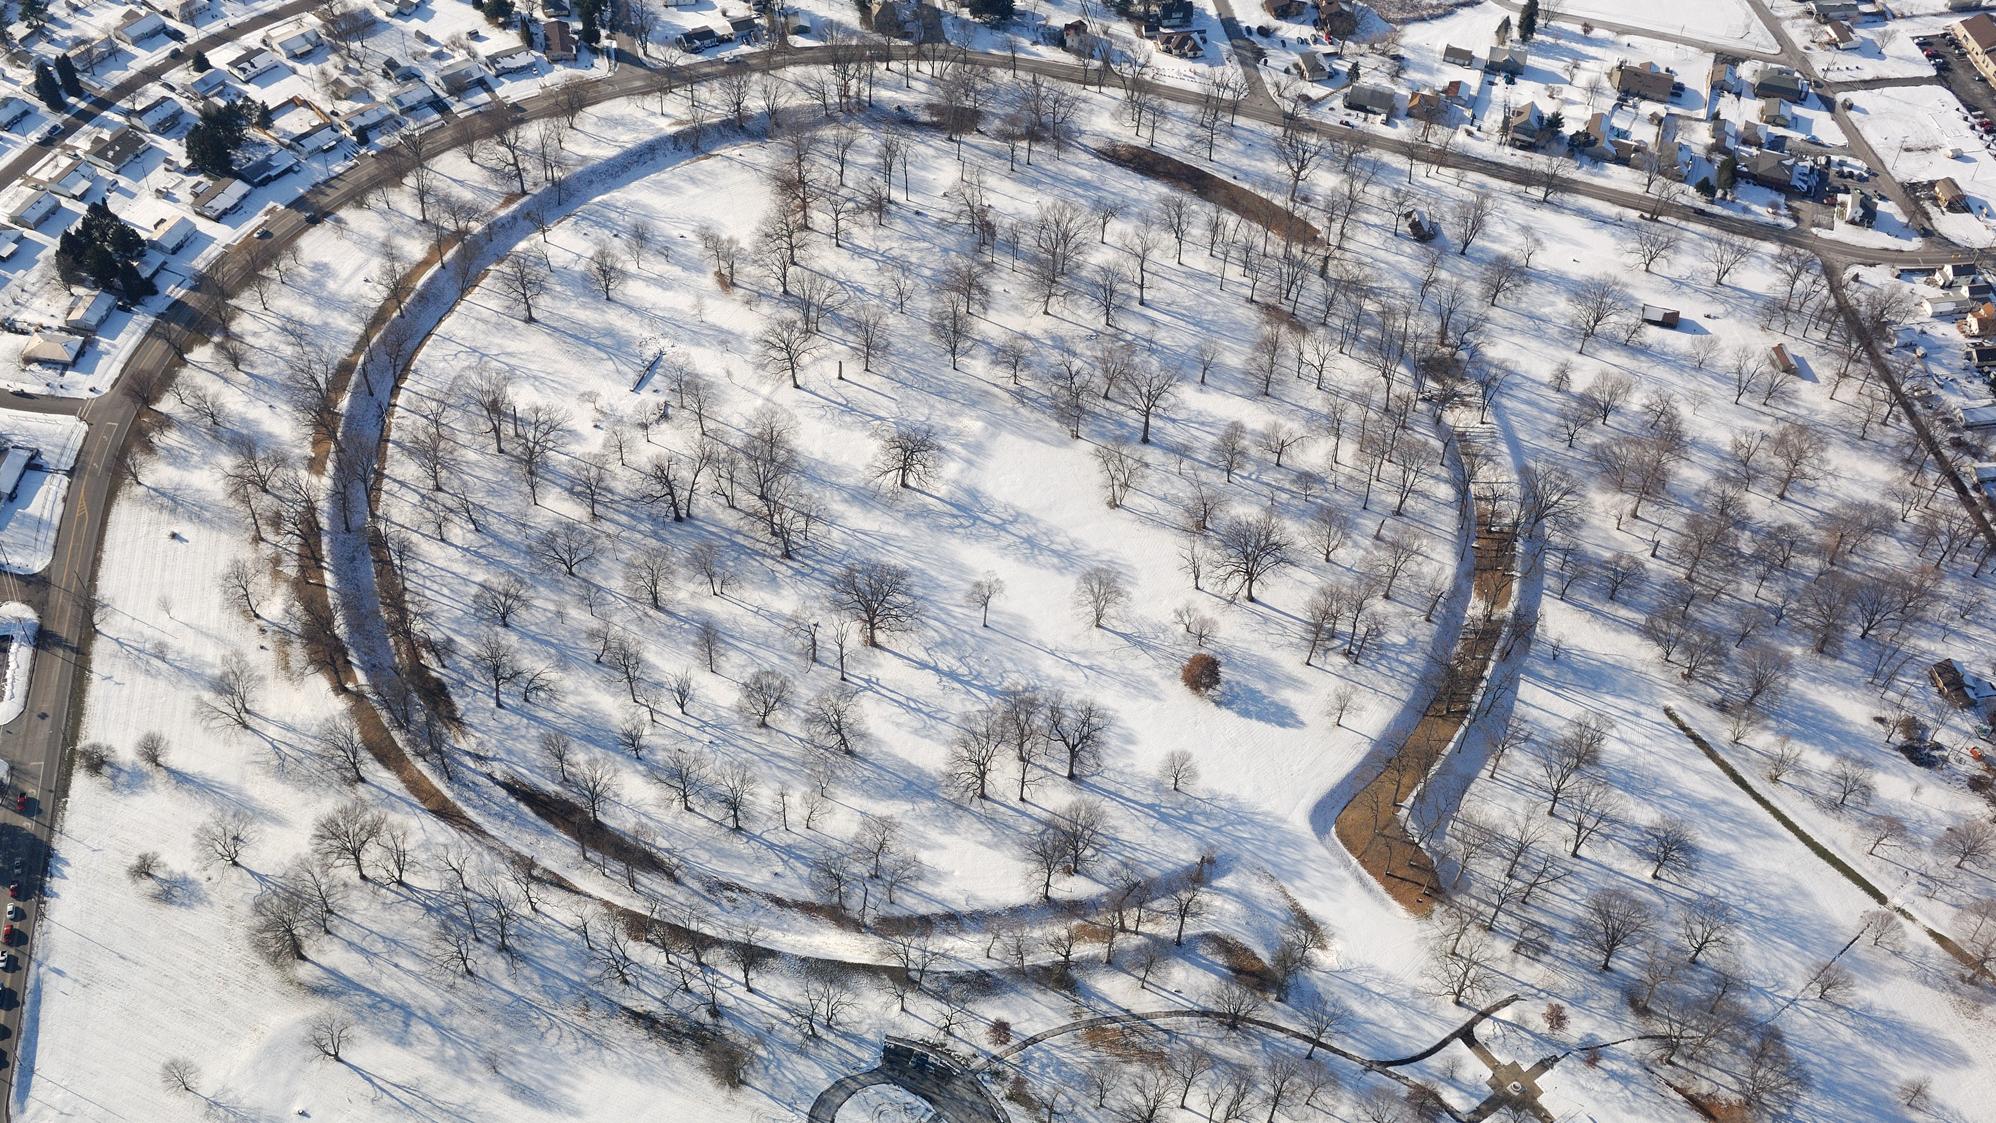 Aerial view of the Great Circle earthworks, part of the Newark Earthworks in winter. Image courtesy of Timothy E. Black.